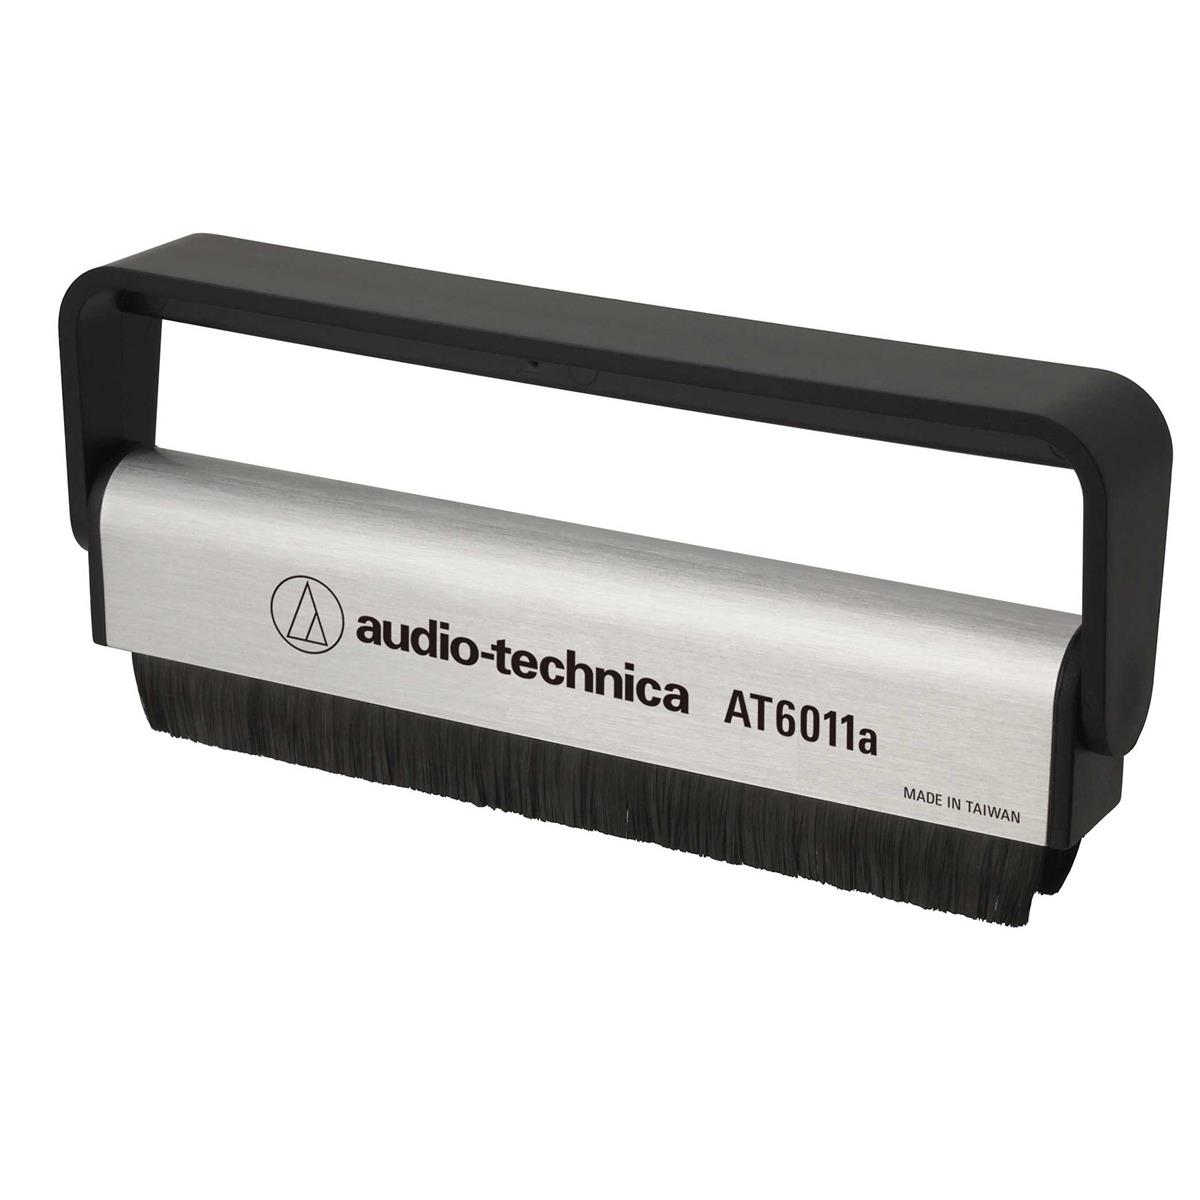 Image of Audio-Technica AT6011a Anti-Static Record Brush